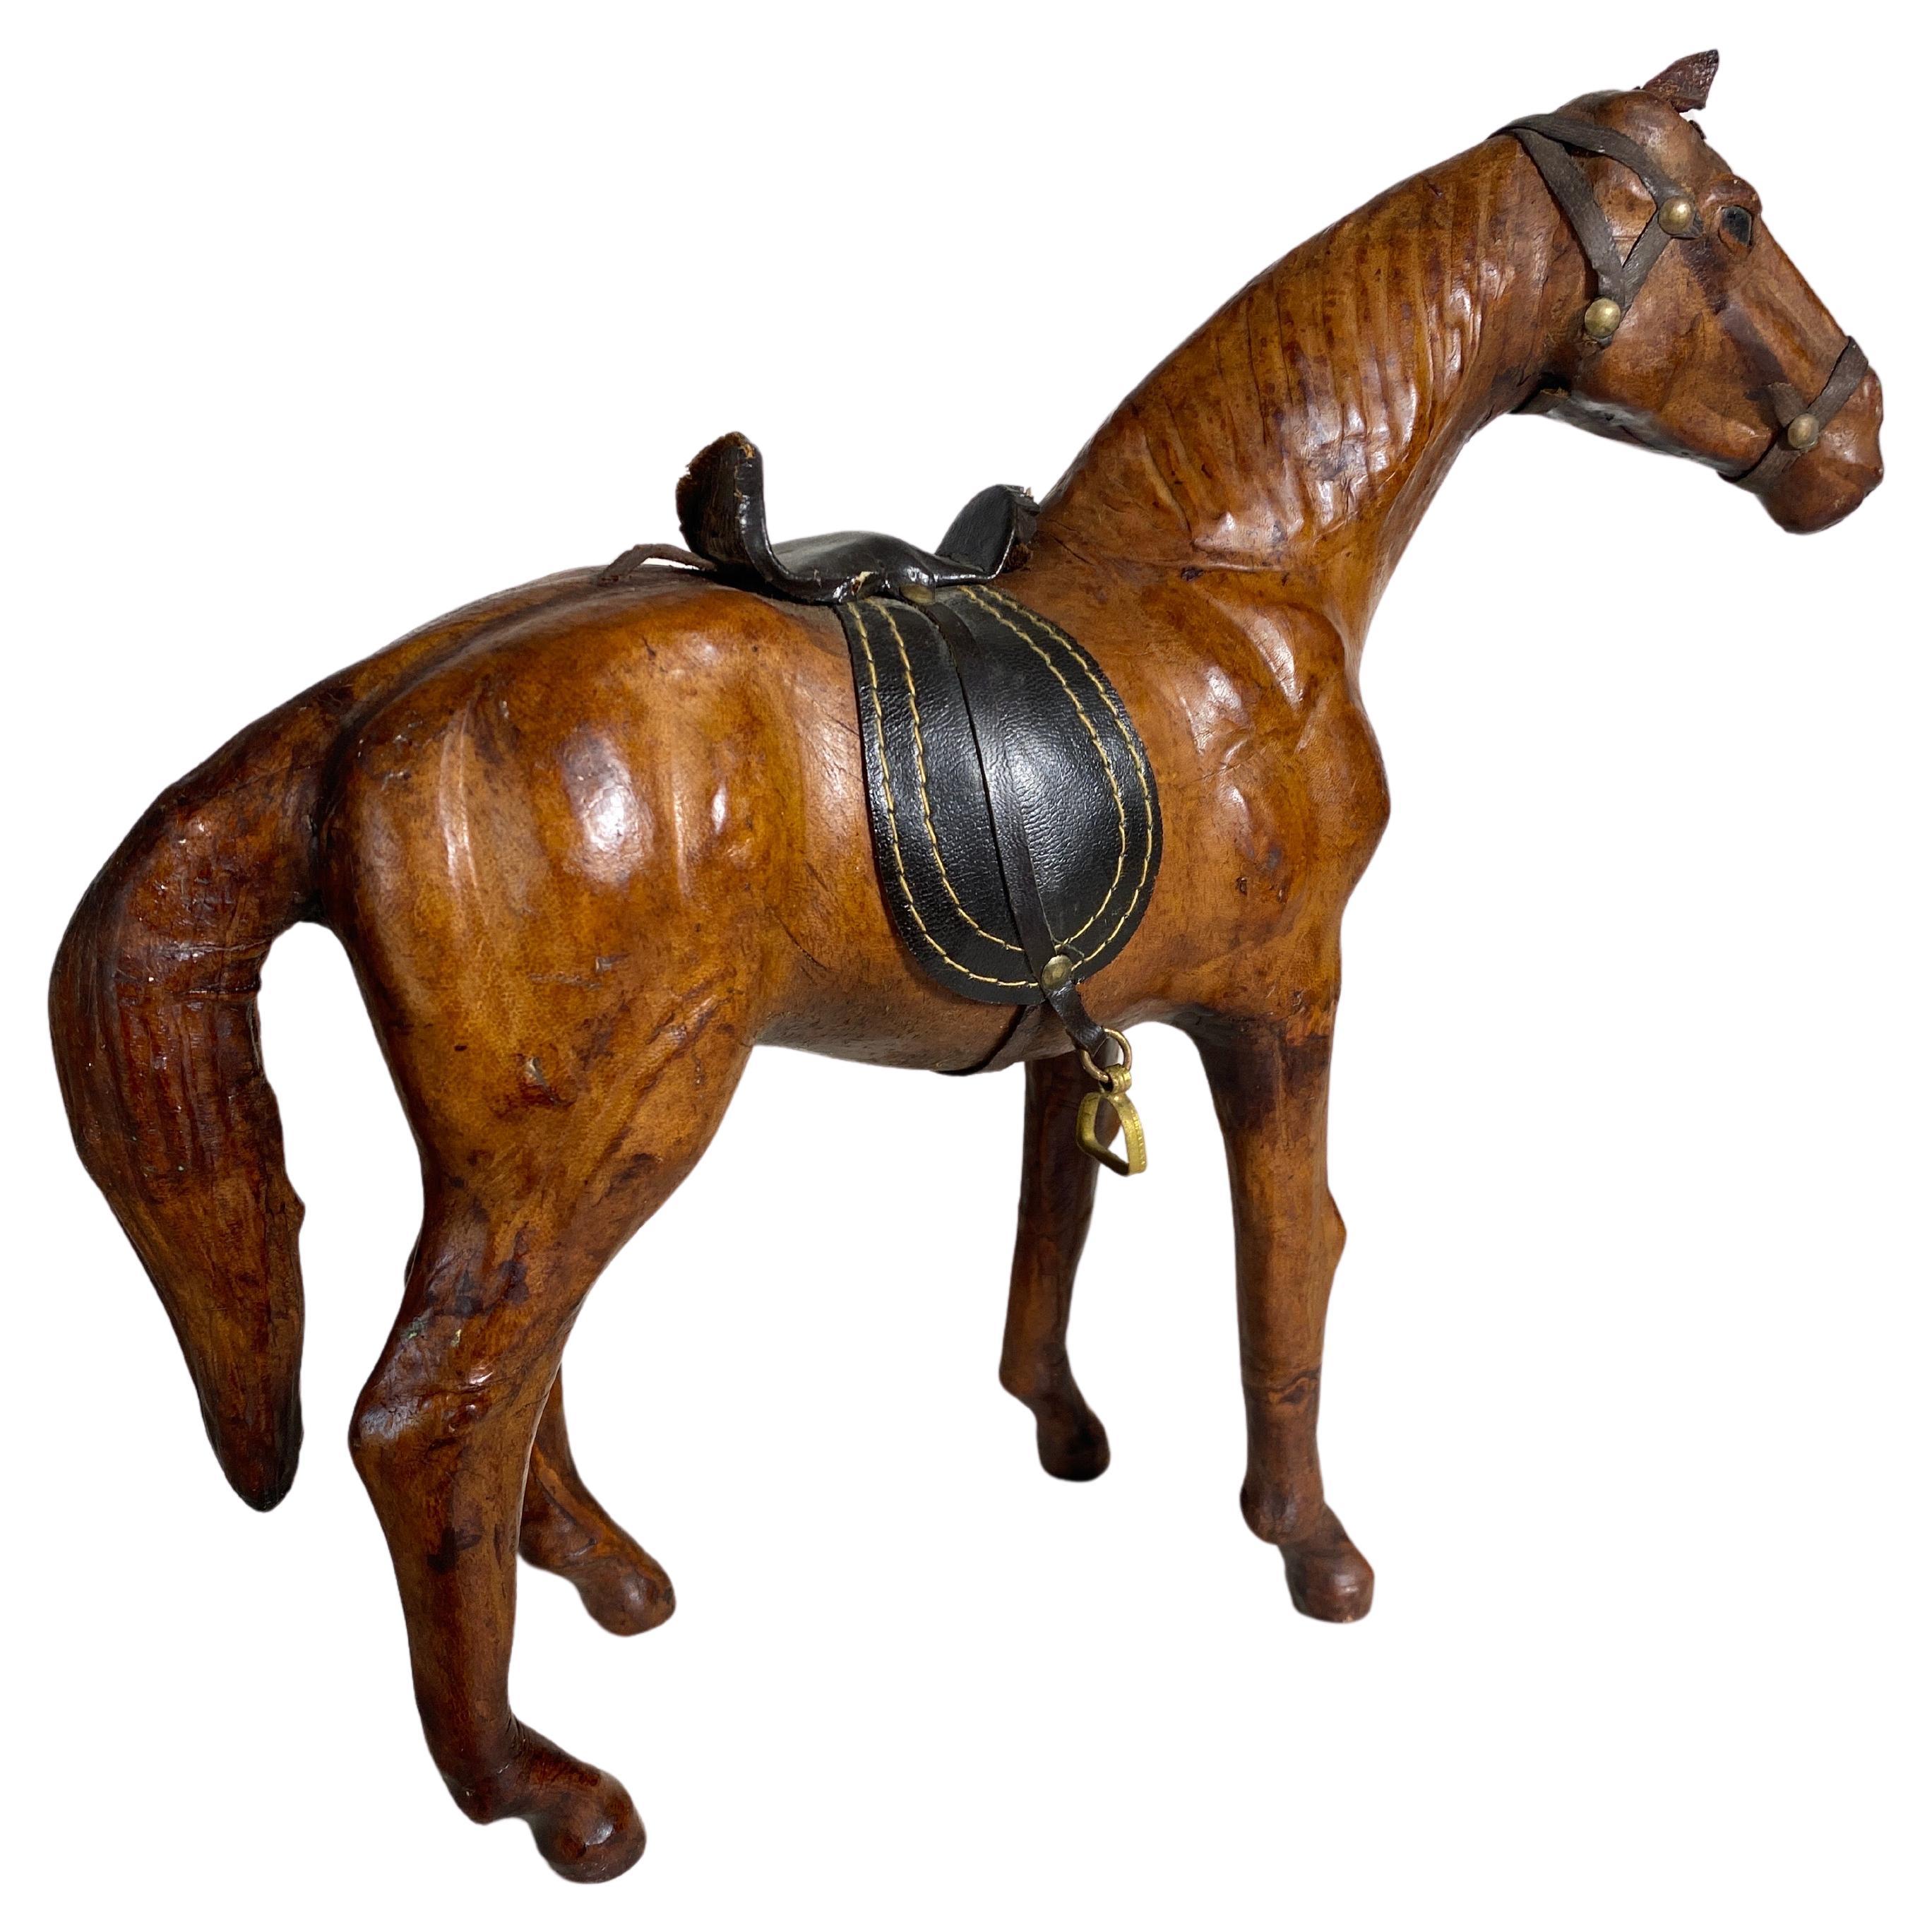 A decorative piece of a leather horse model with saddle from the 1900th century